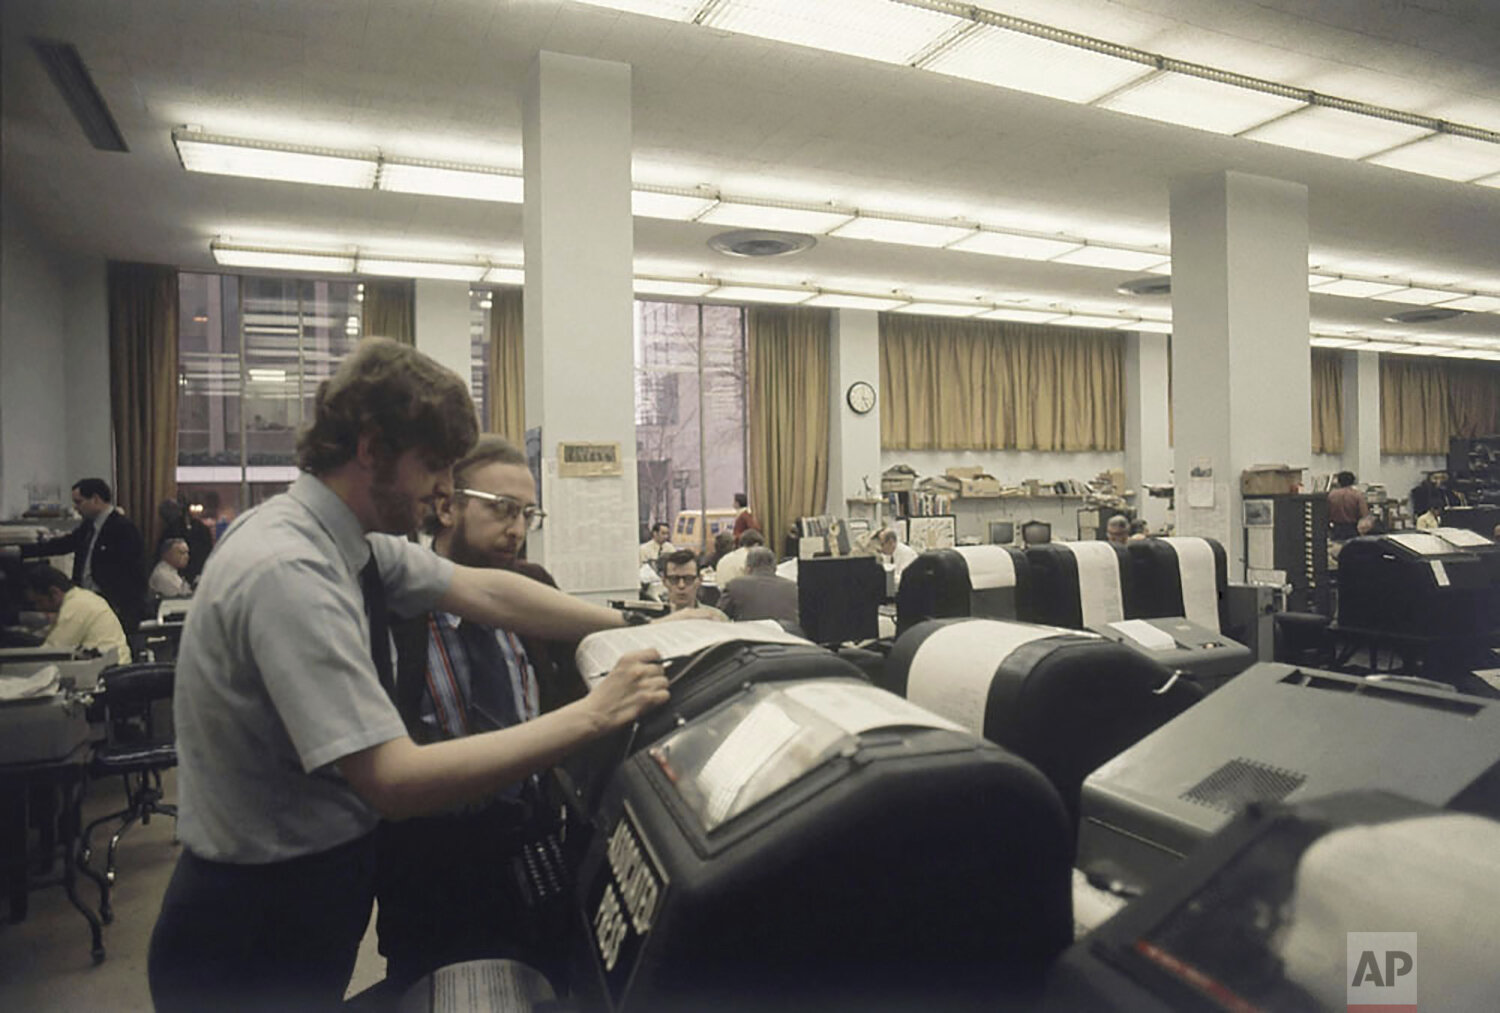  Associated Press journalists work in the Washington bureau on Election Day in 1972. (AP Photo) 